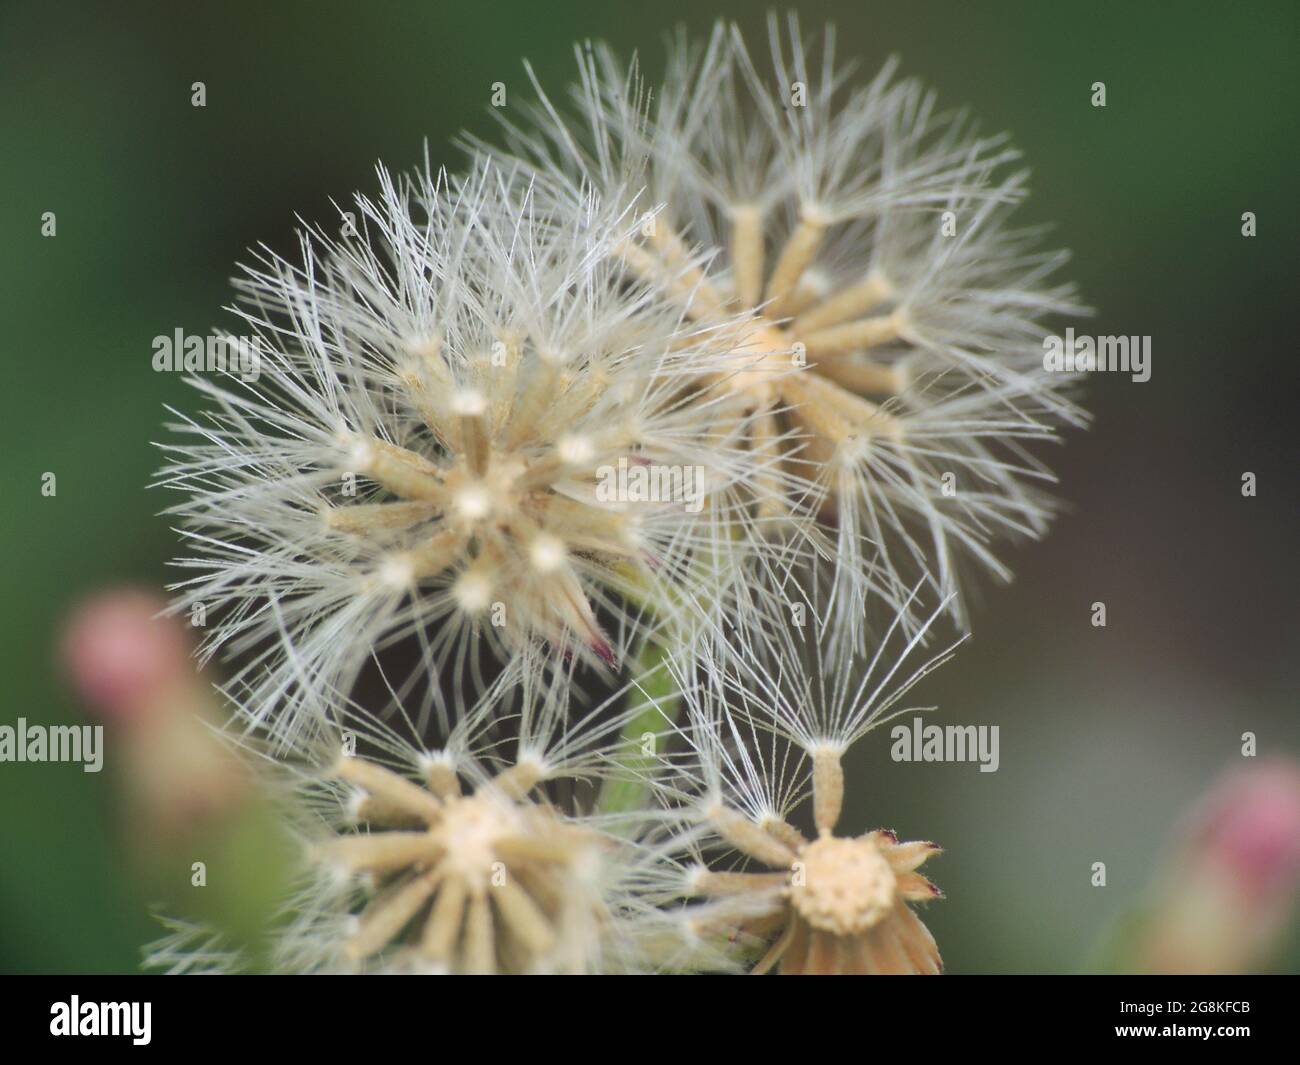 Closeup shot of white seeds of ironweed or Vernonia flower isolated on blurred background Stock Photo